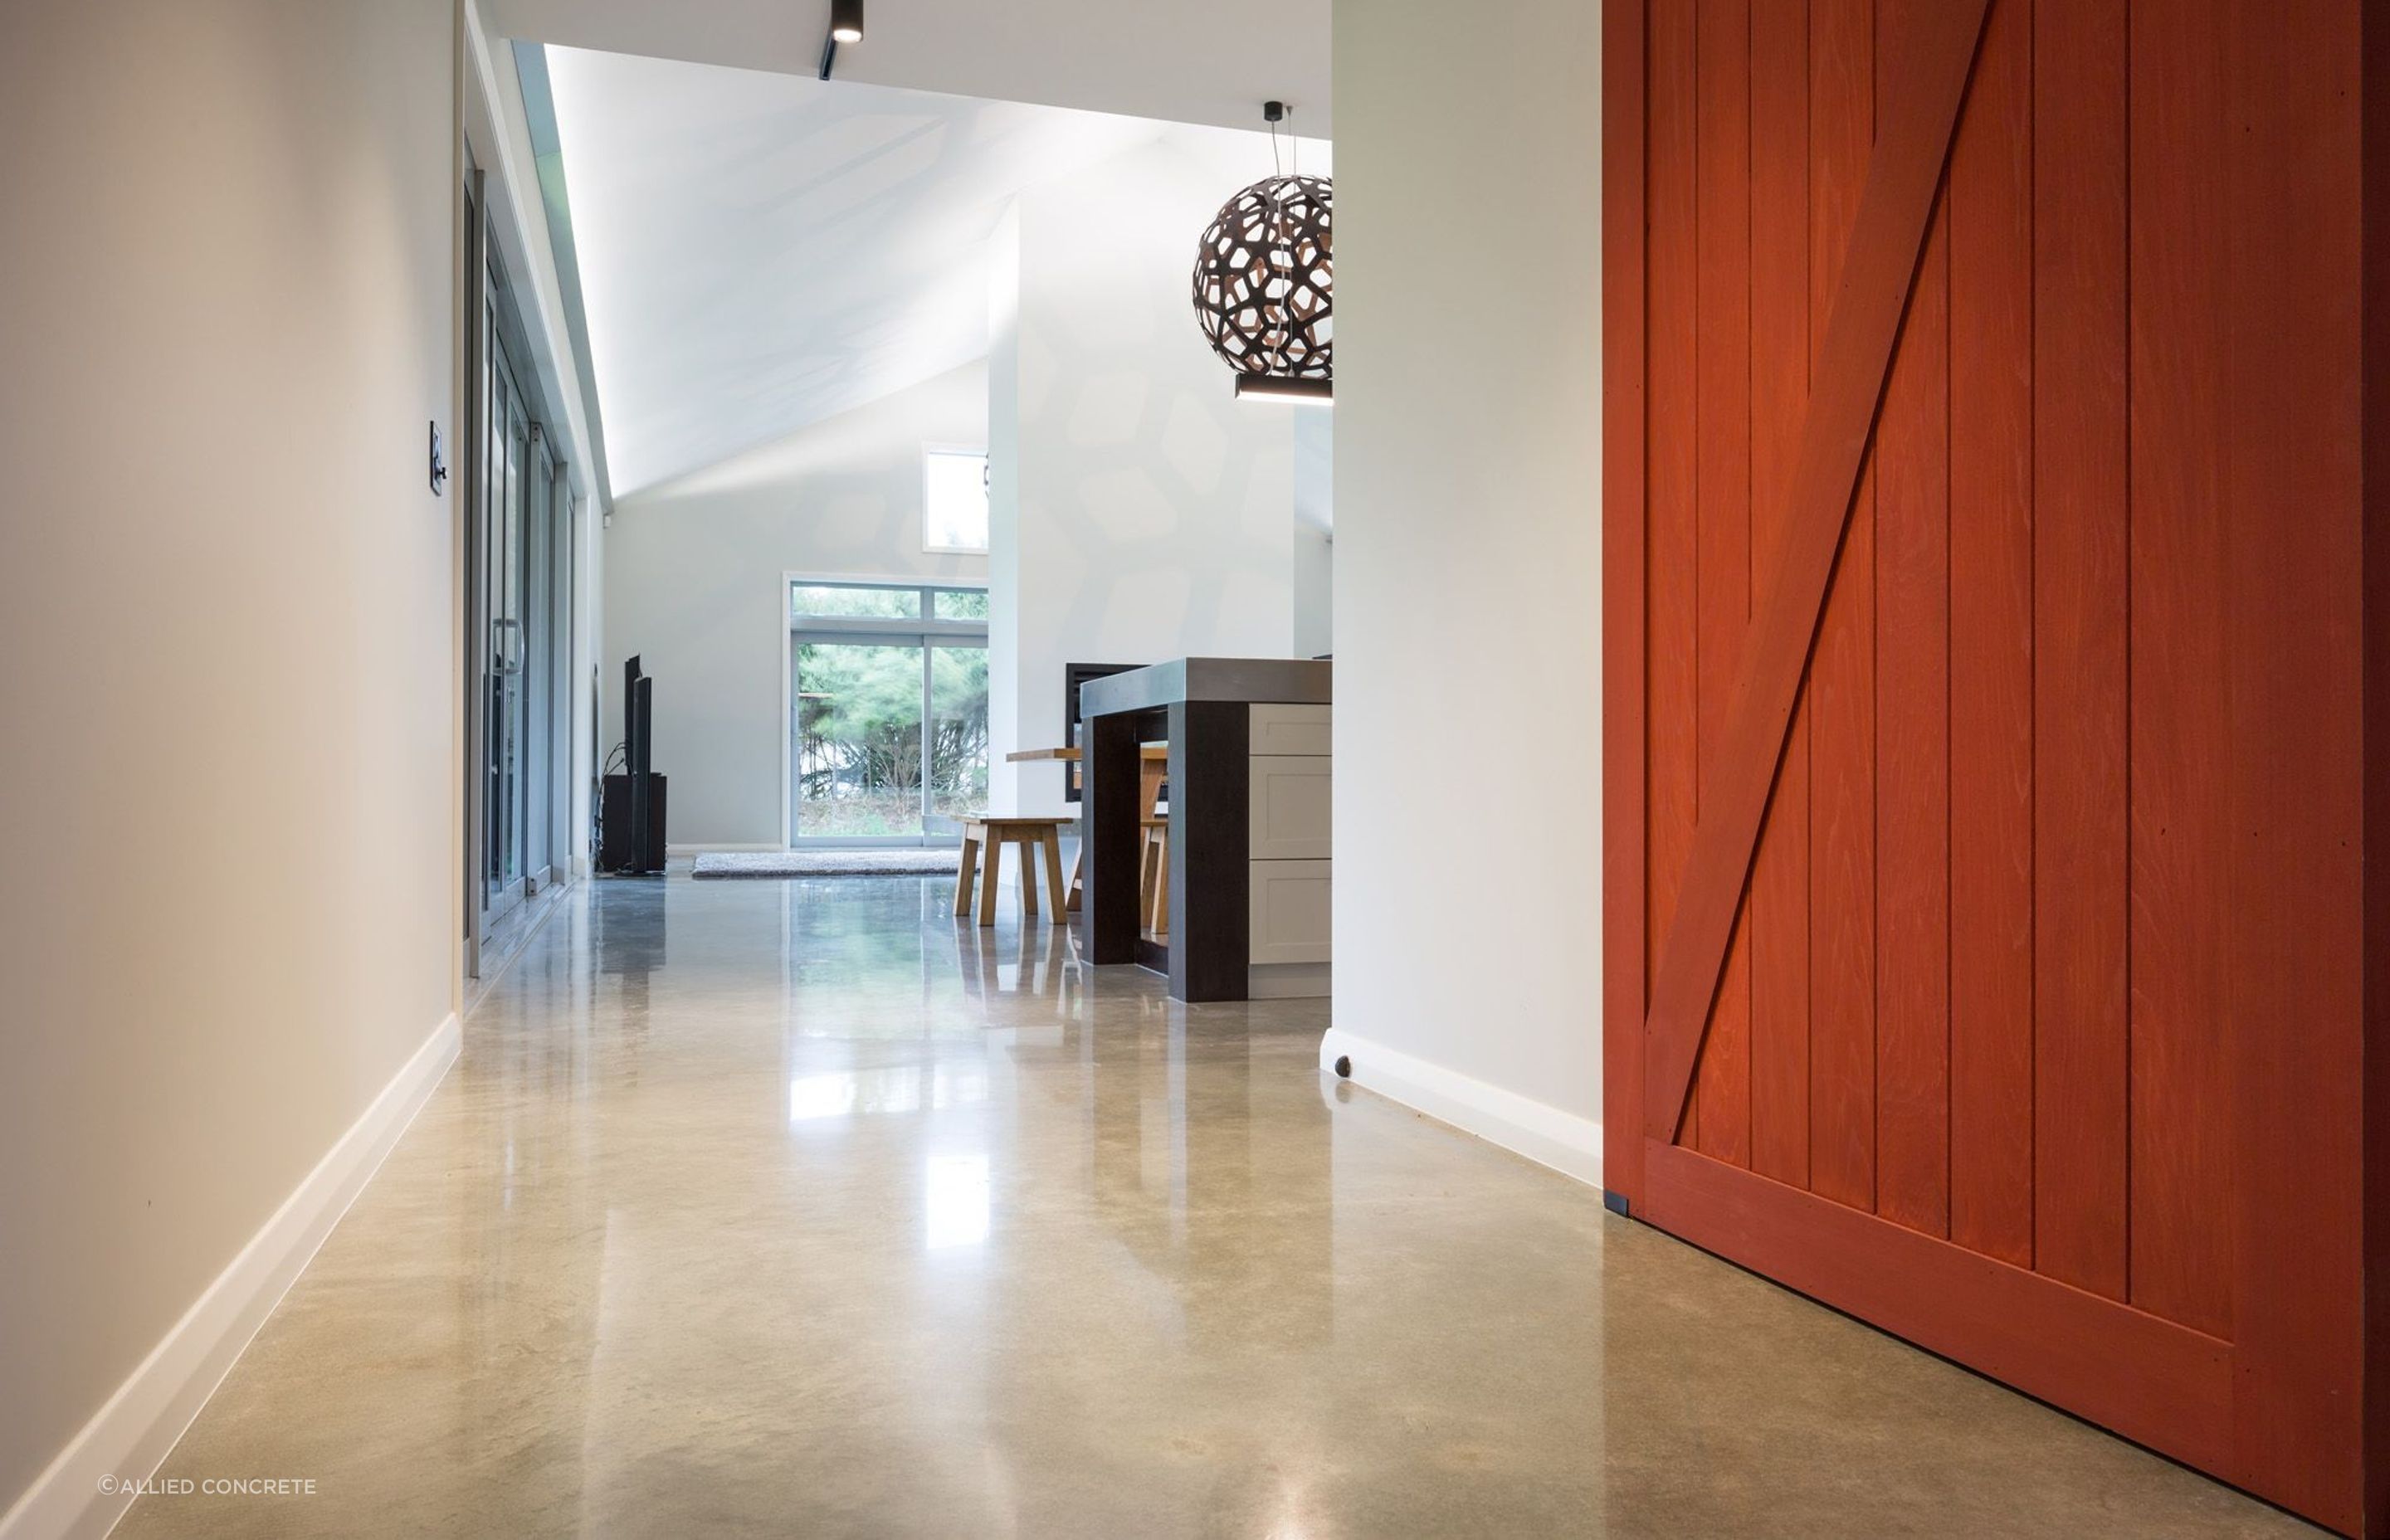 Allied Concrete's READY Colour gives you complete design flexibility inside and out.